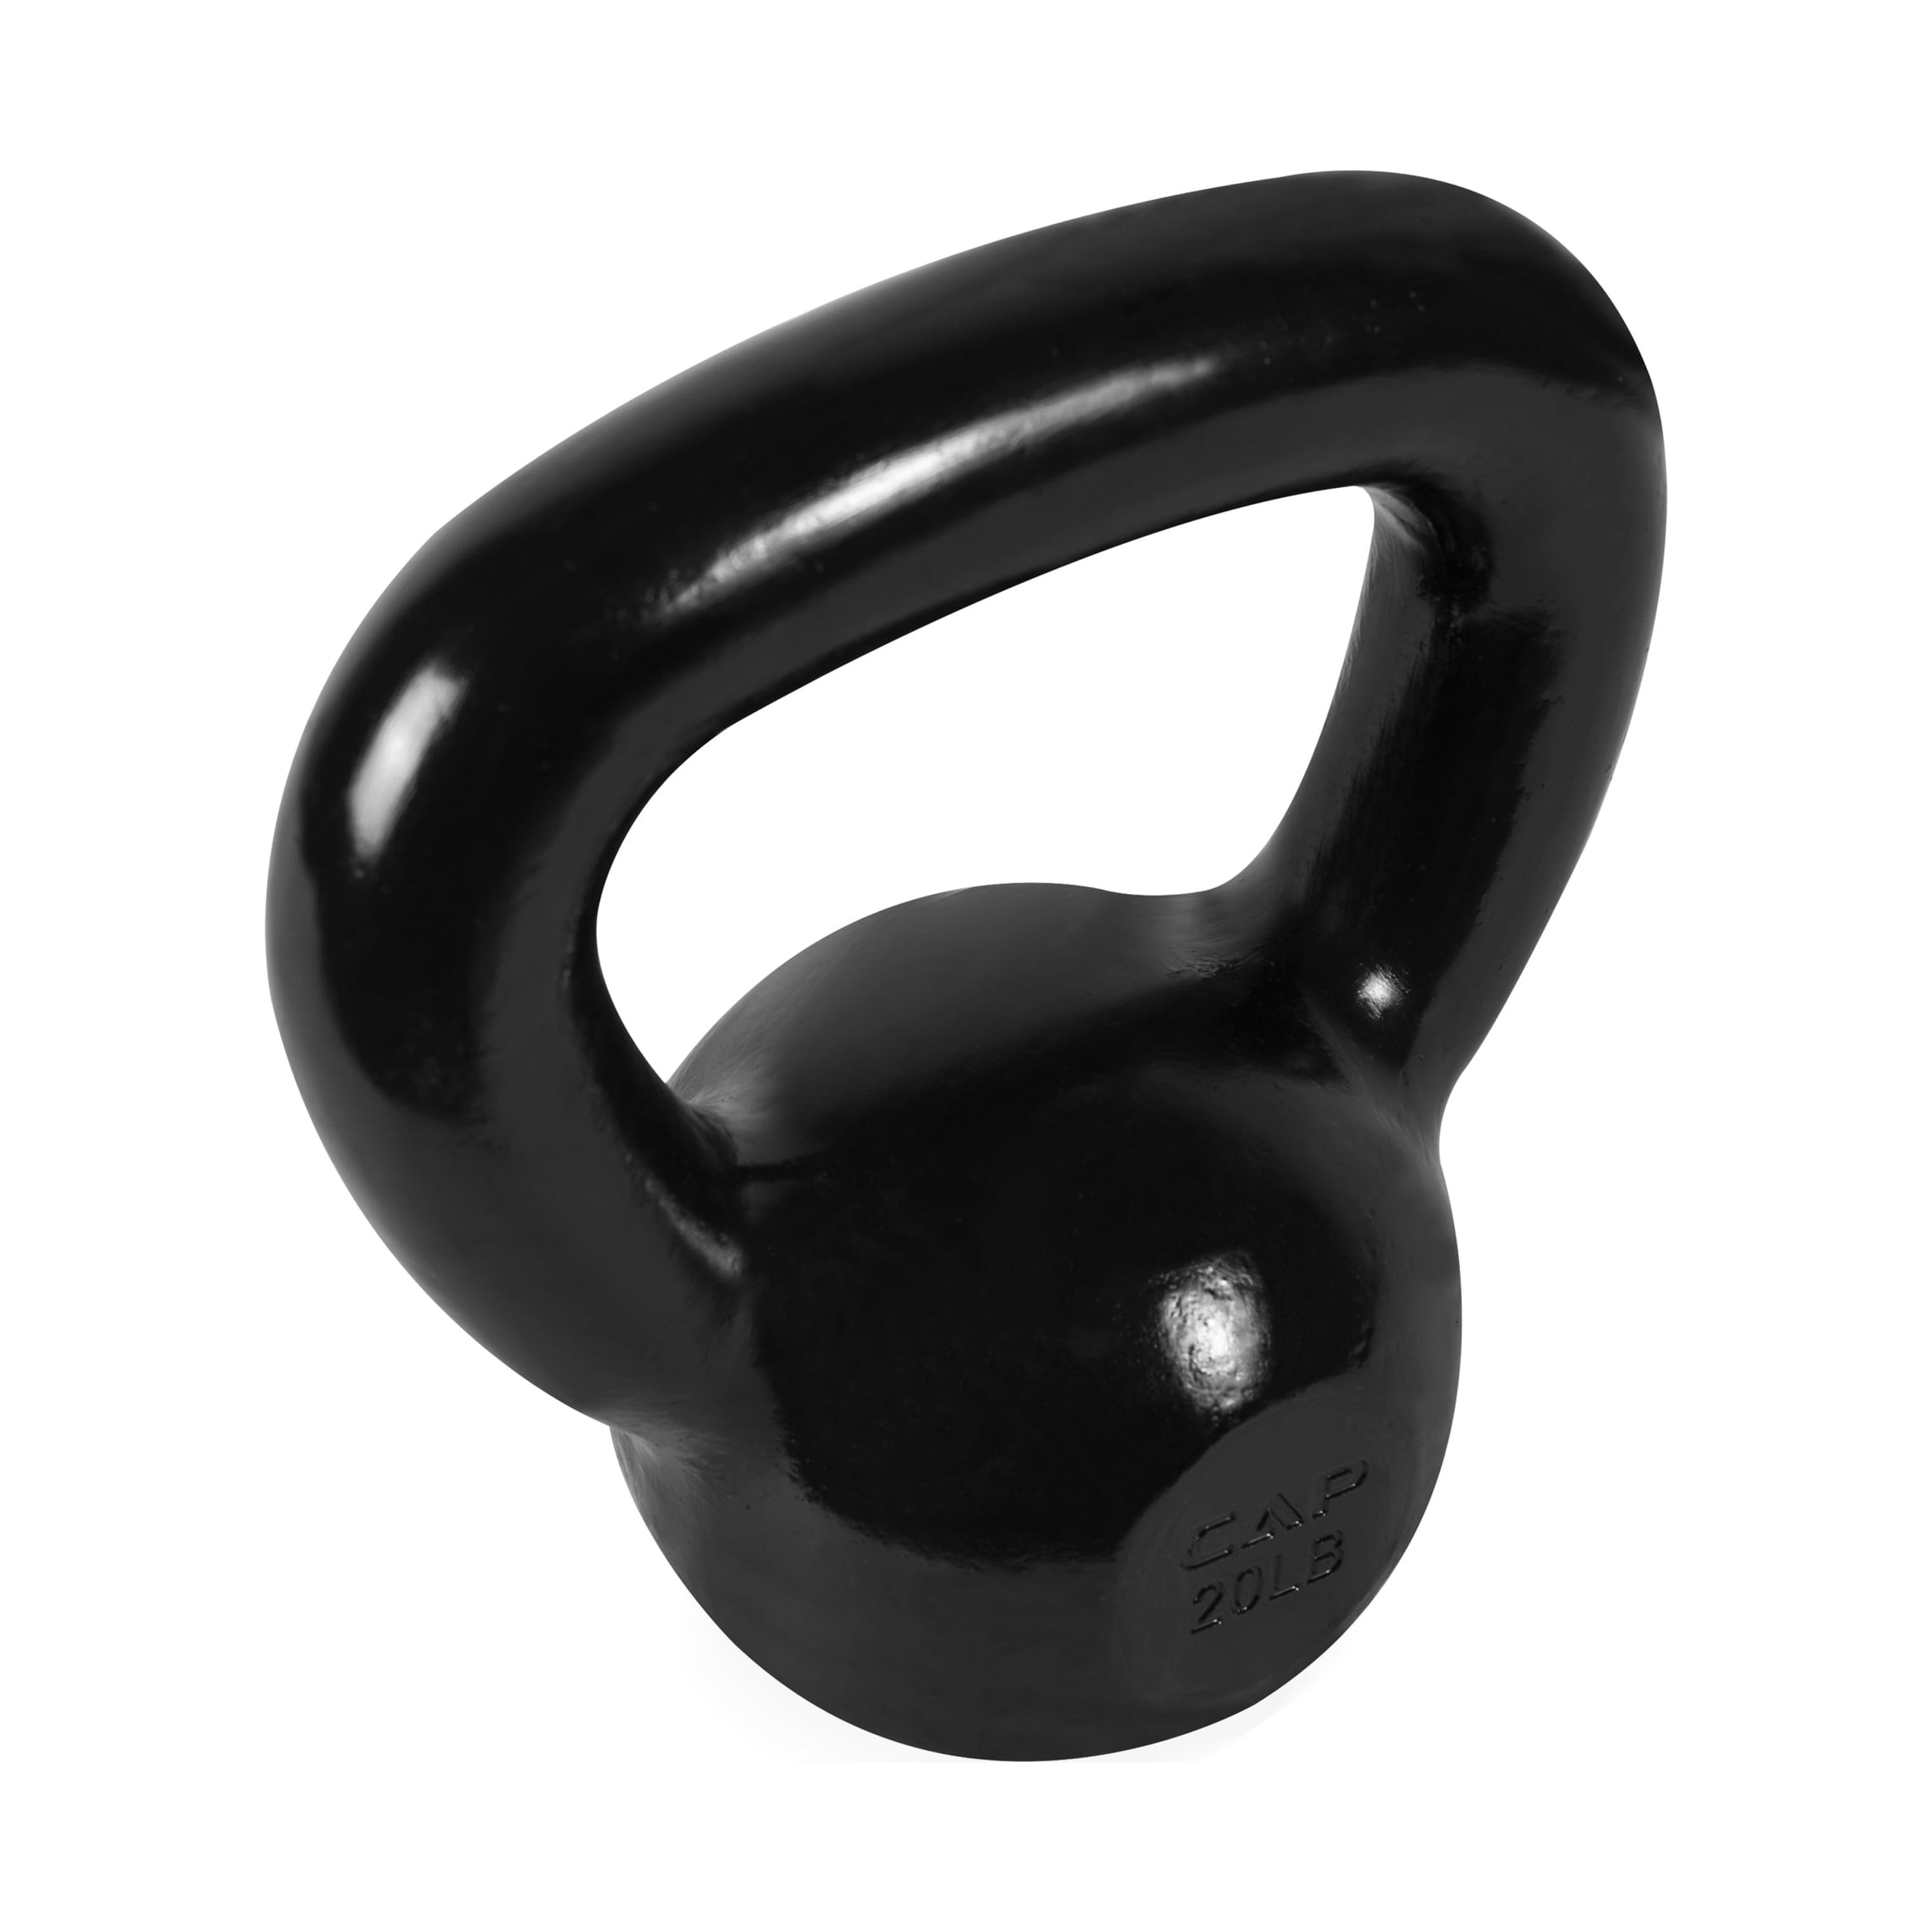 CAP Barbell Cast Iron Kettlebell, Black 20LBS - image 4 of 8